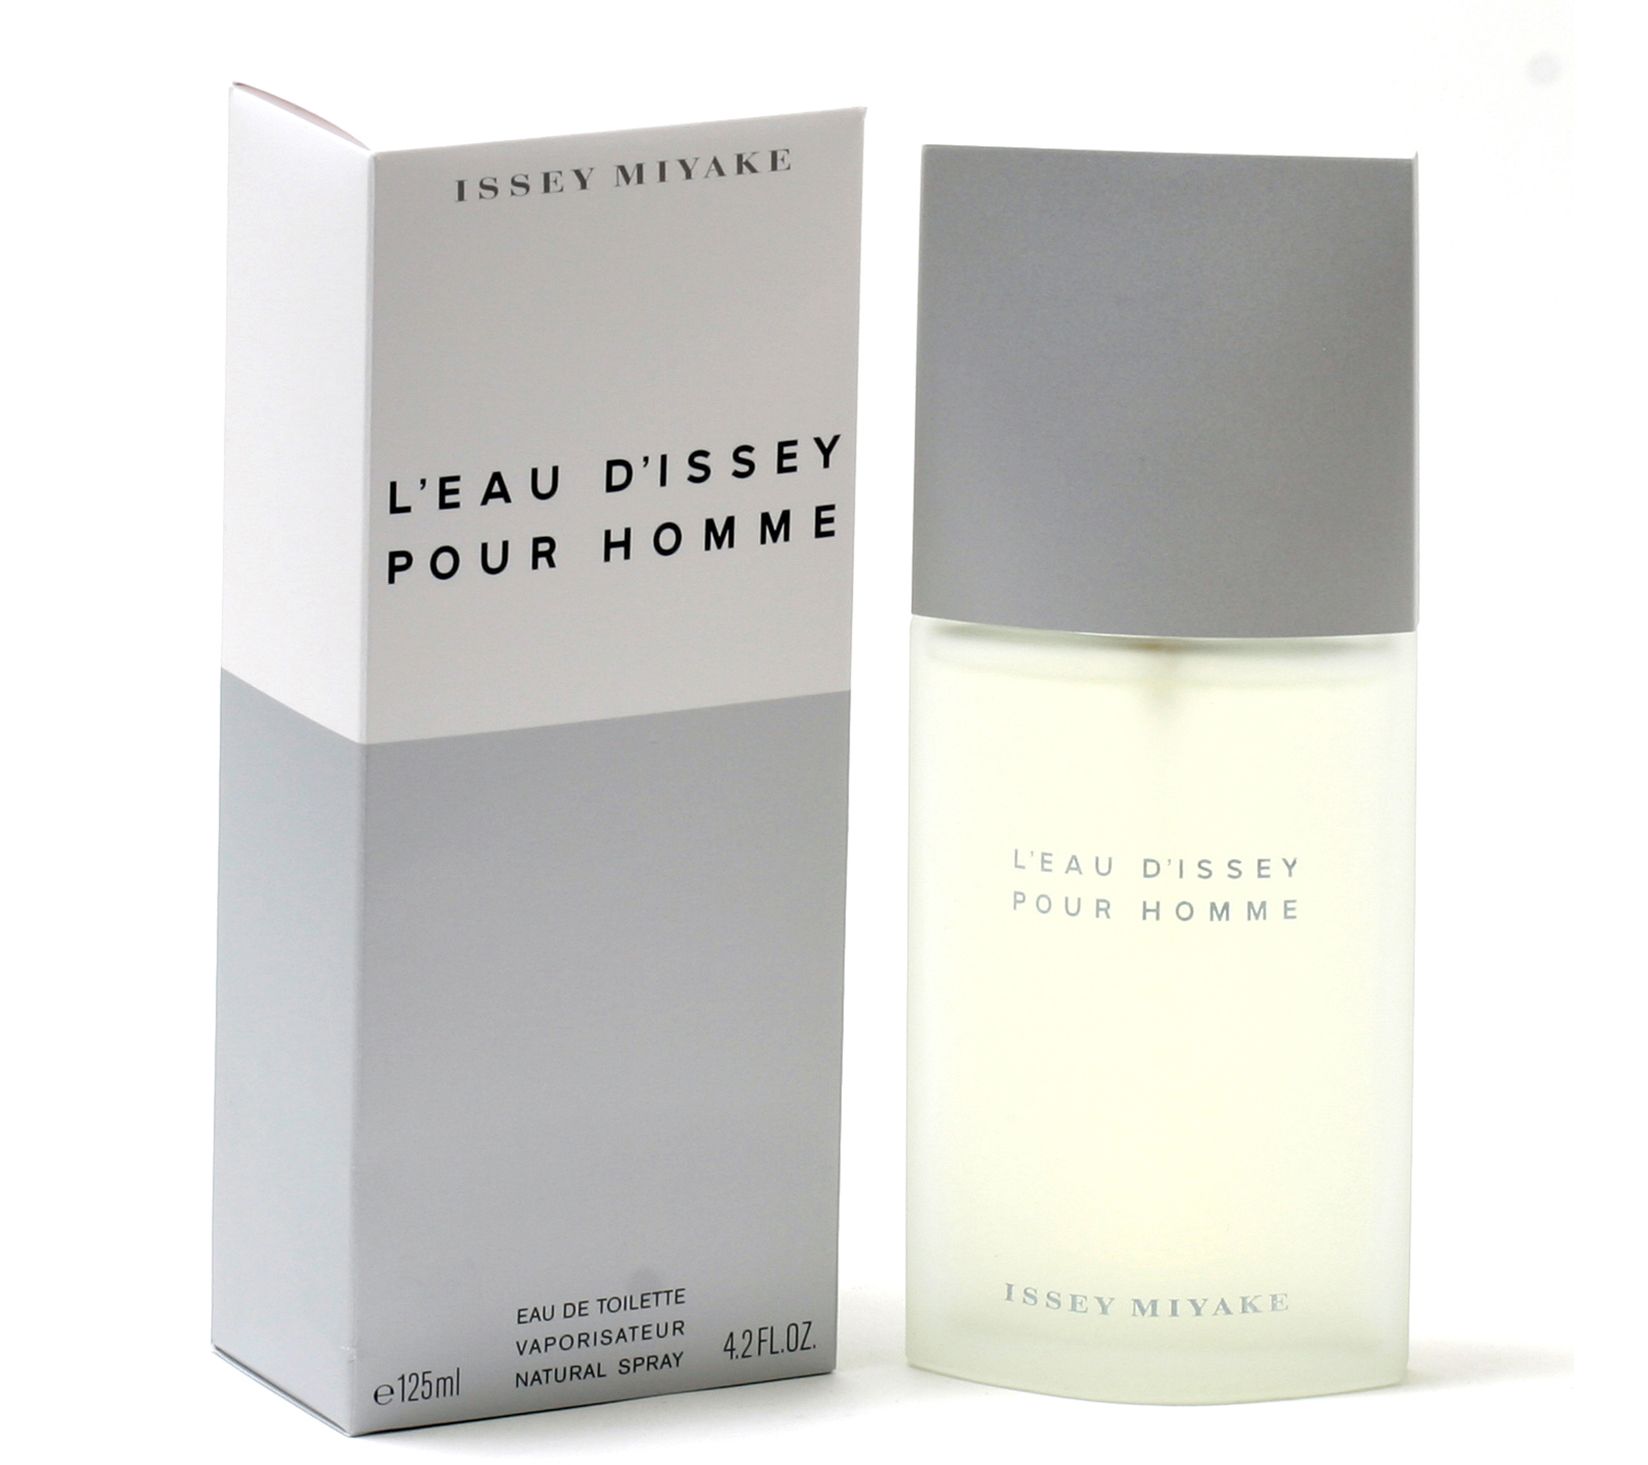  Nuit d'Issey by Issey Miyake for Men 4.2 oz Eau de